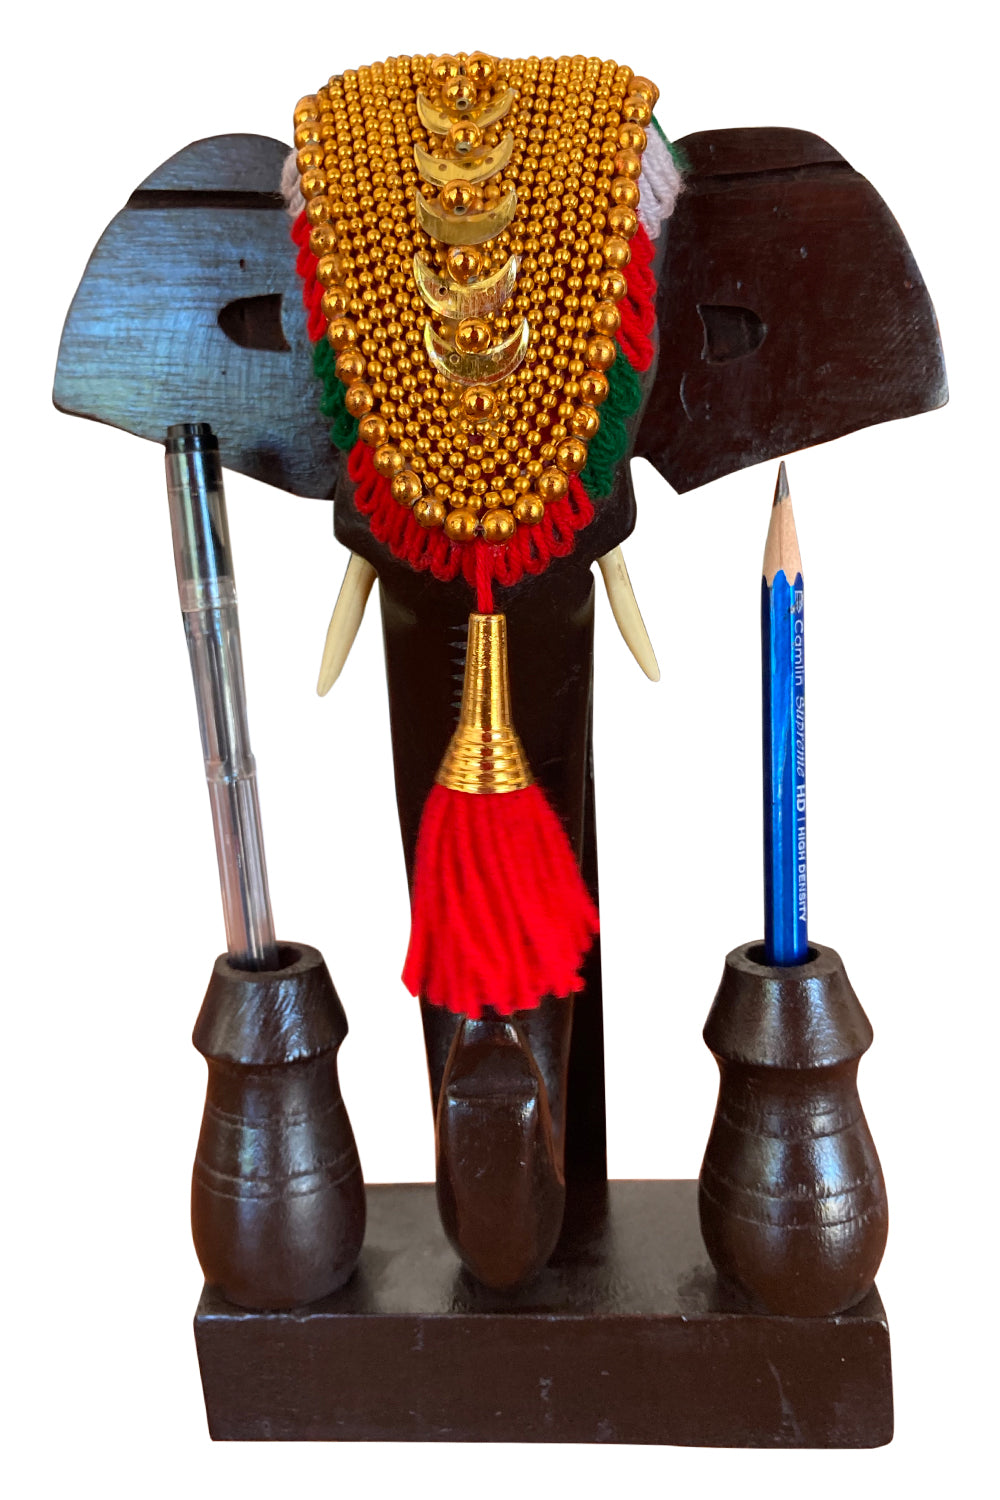 Southloom Handmade Temple Elephant Head with Pen Holder Handicraft 10 inches (Carved from Mahogany Wood)